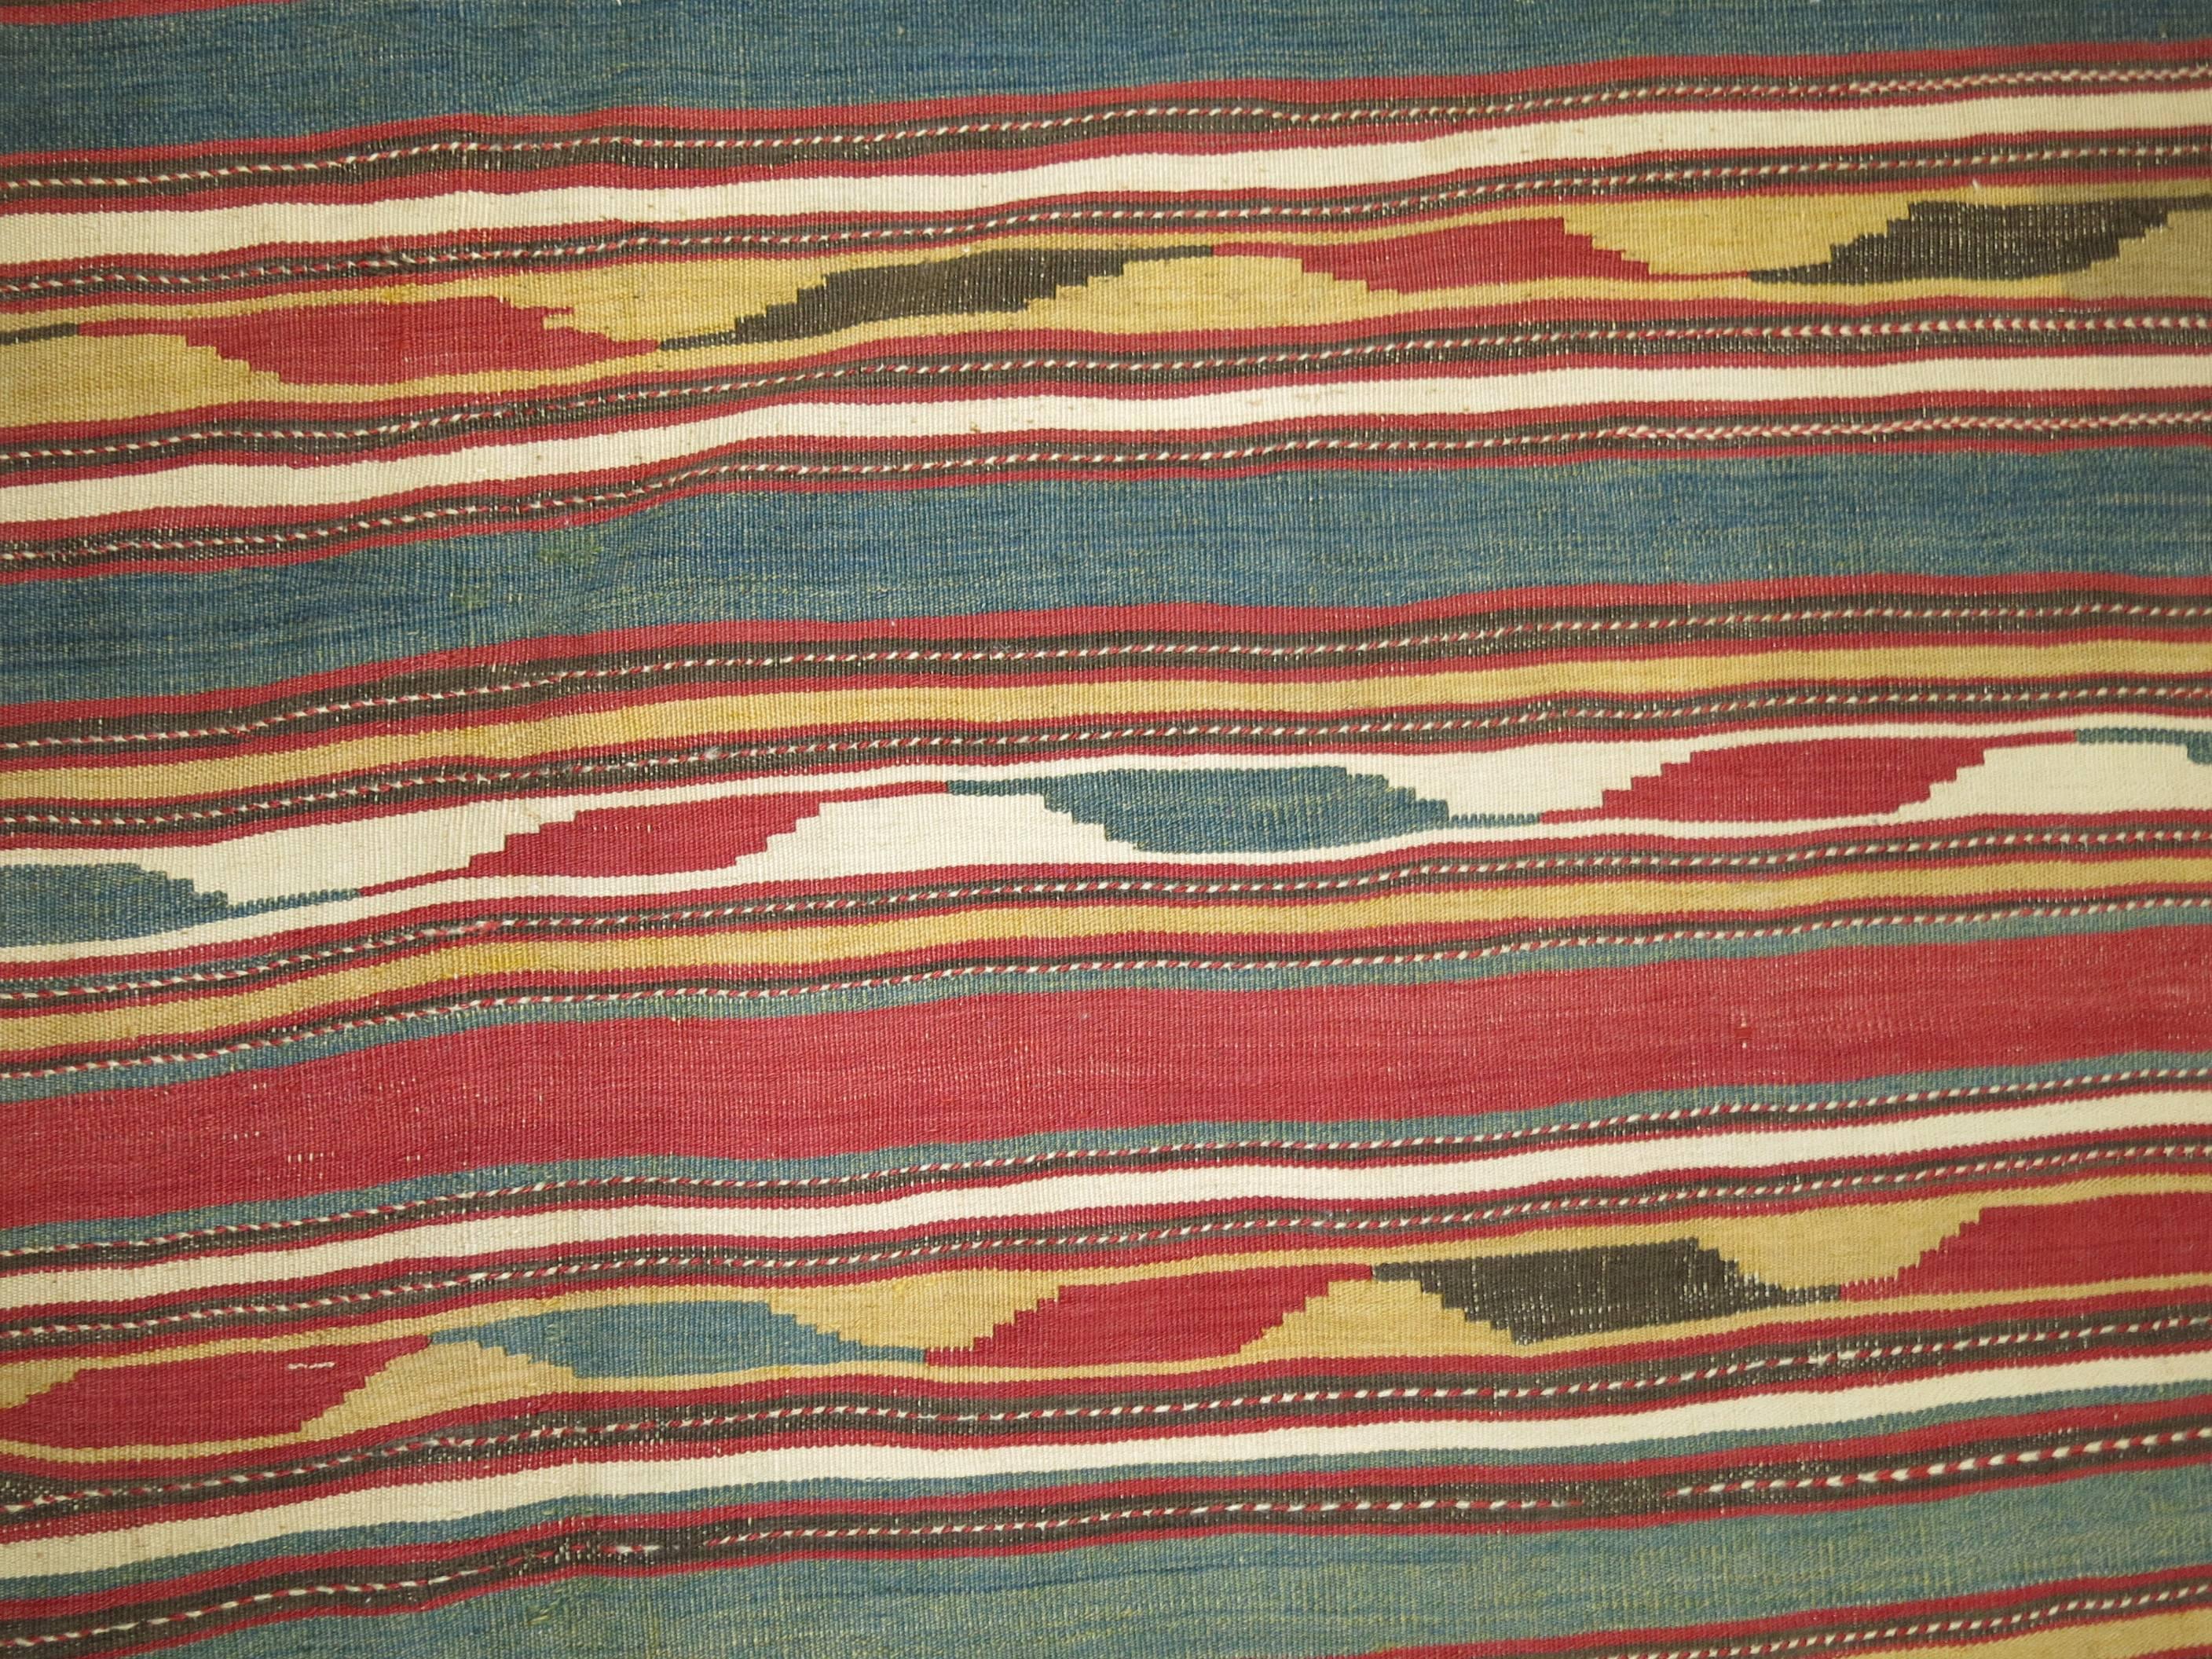 Tribal Rustic Persian Wool Handmade Kilim Green Mustard Red Accent For Sale 4